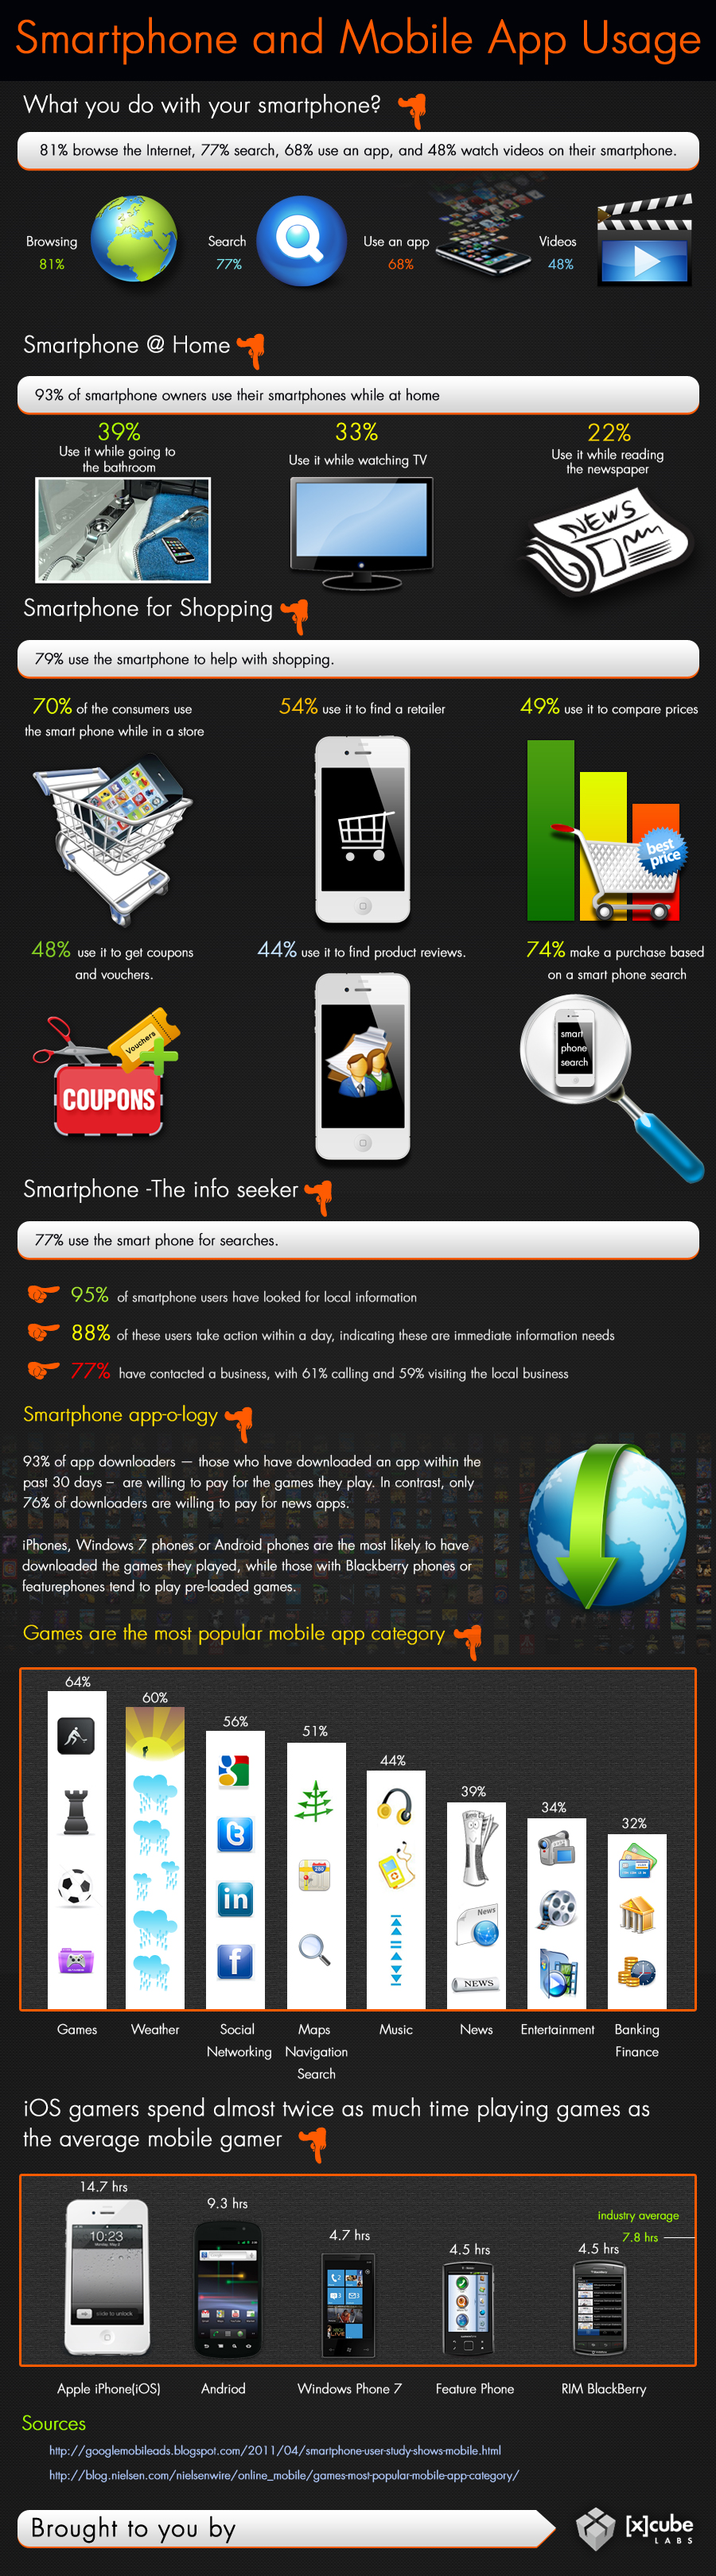 Smartphone and Mobile app usage